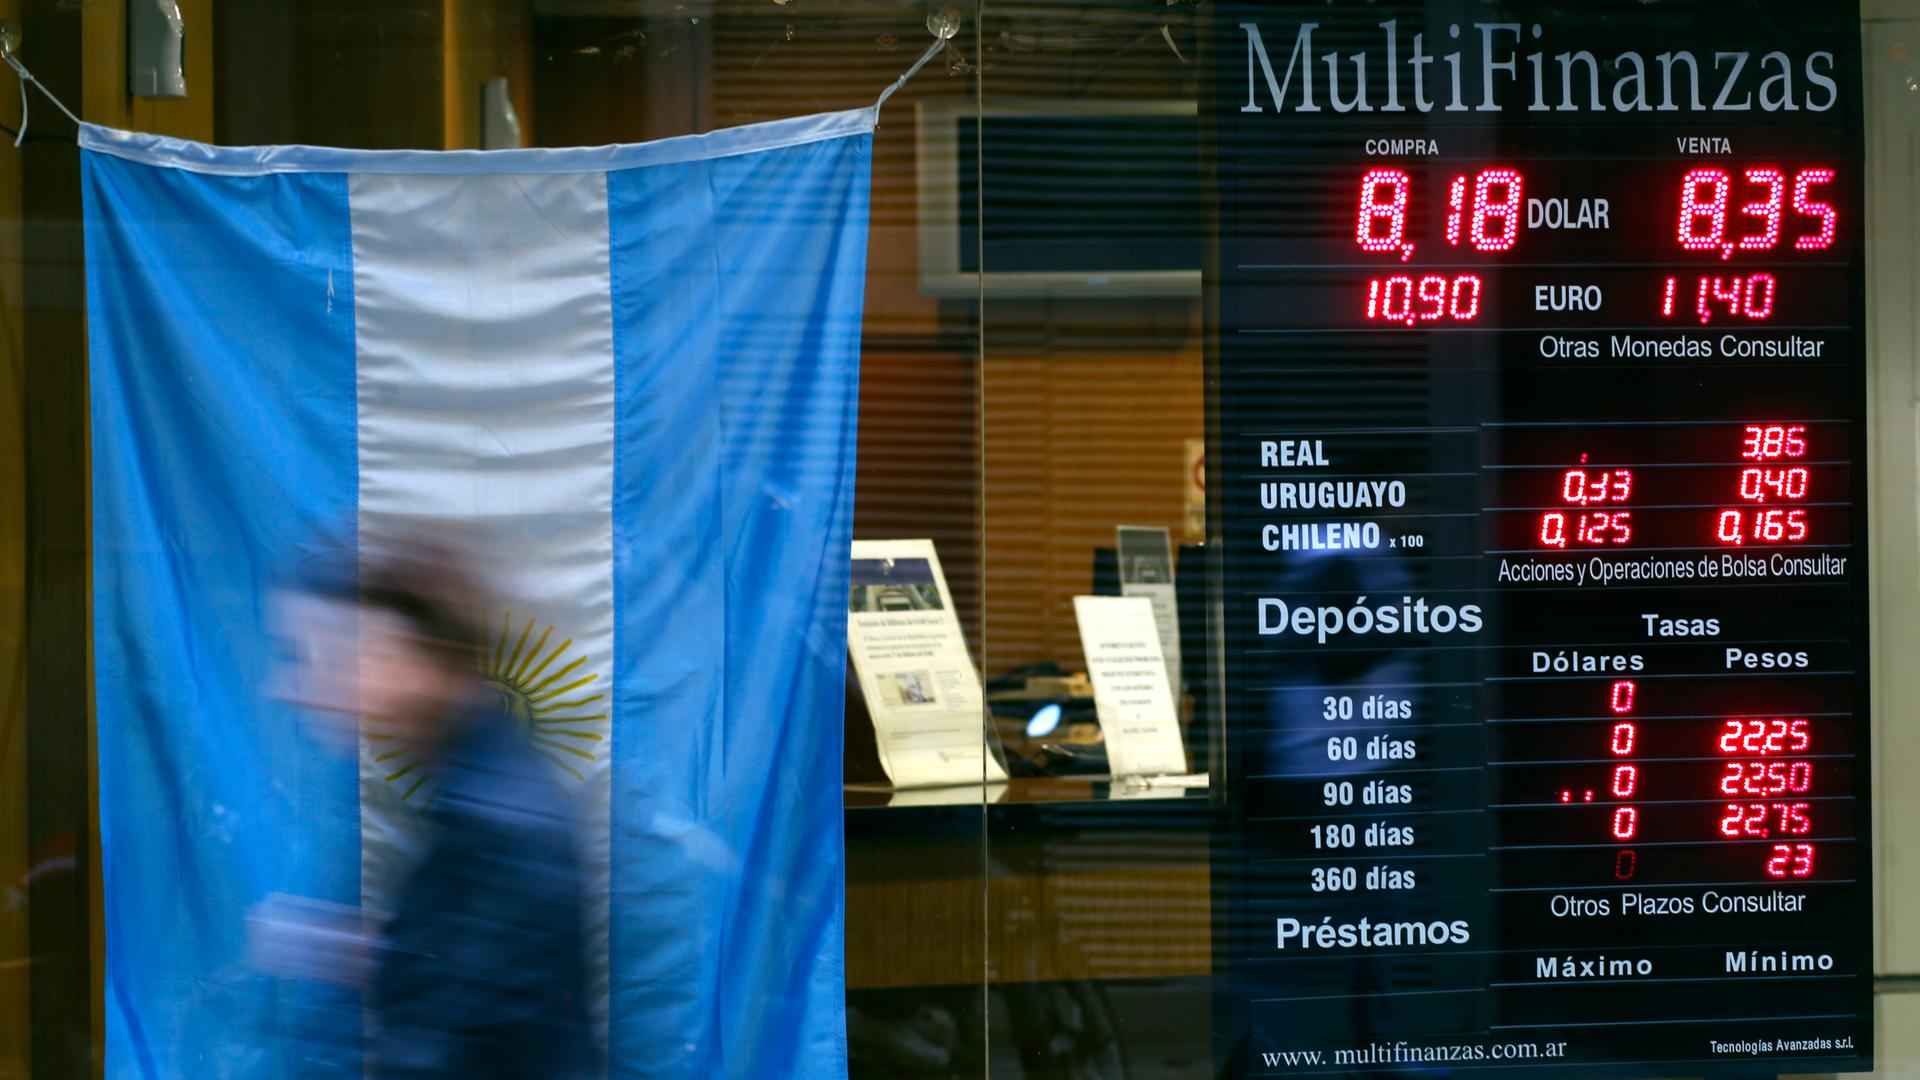 A woman walks past a currency exchange store with an Argentine national flag on display in Buenos Aires' financial district on August 14, 2014